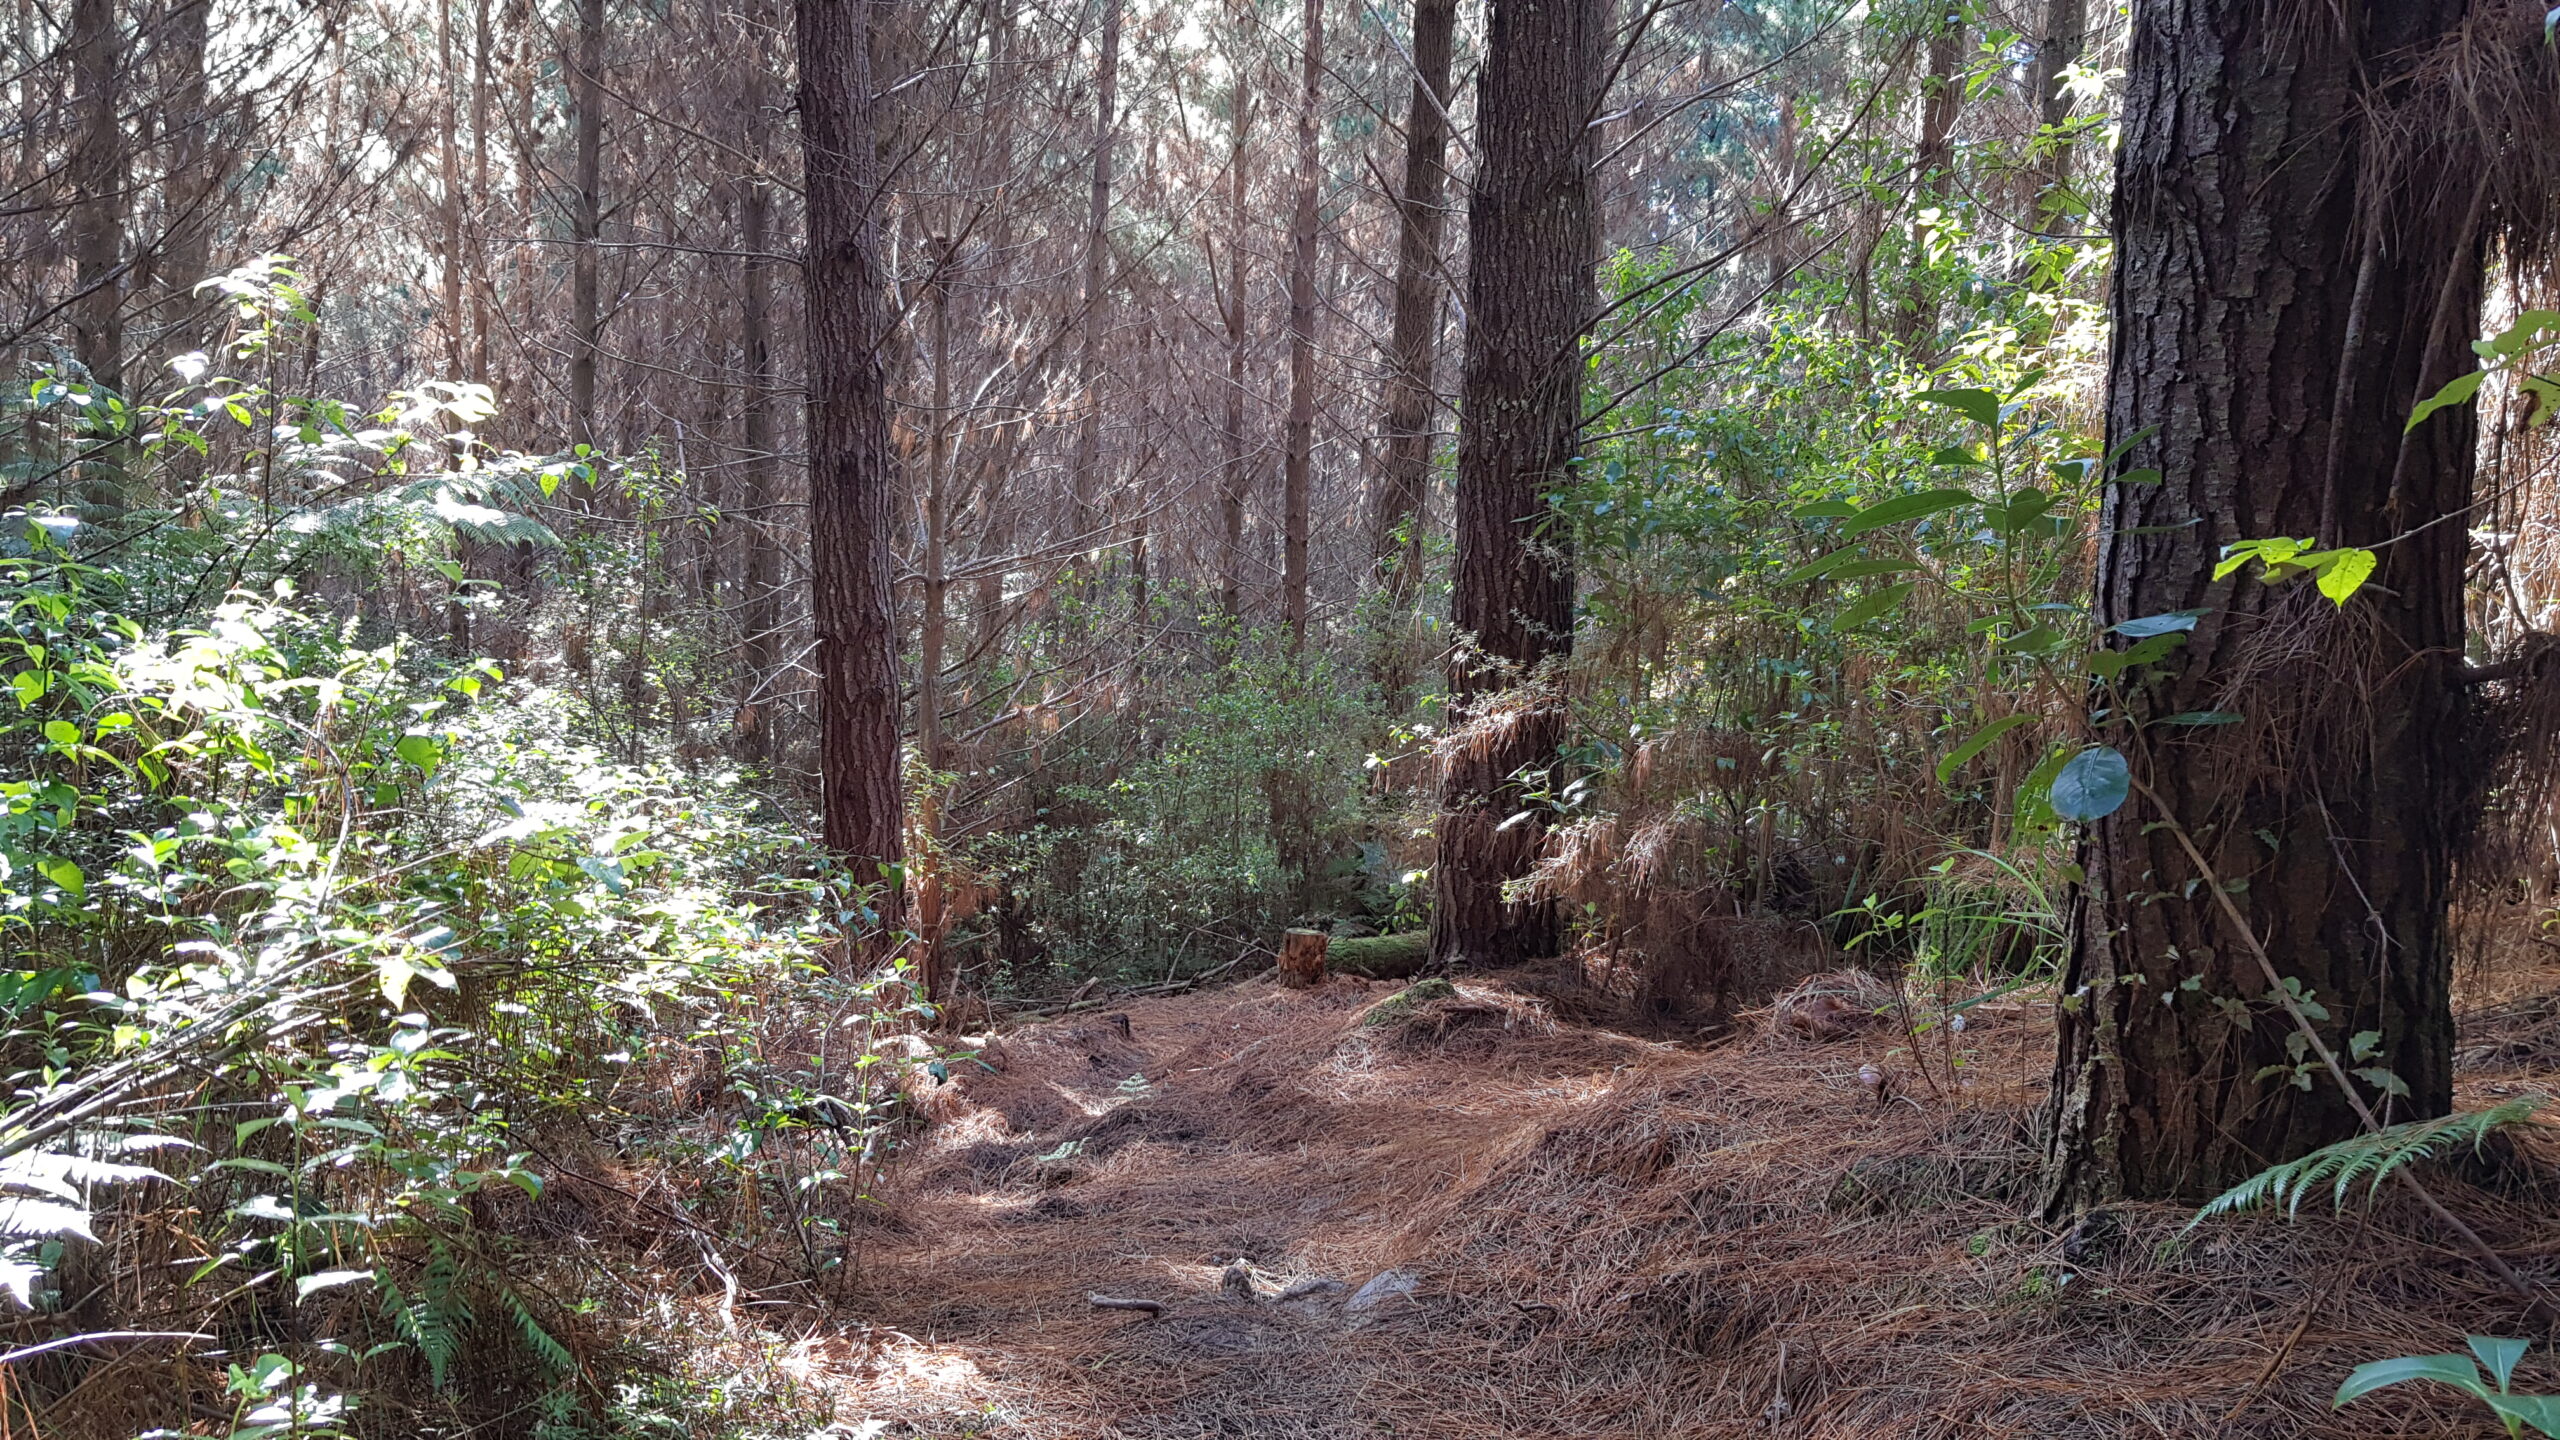 Pine forest with undergroth each side of a track covered in brown pine needles